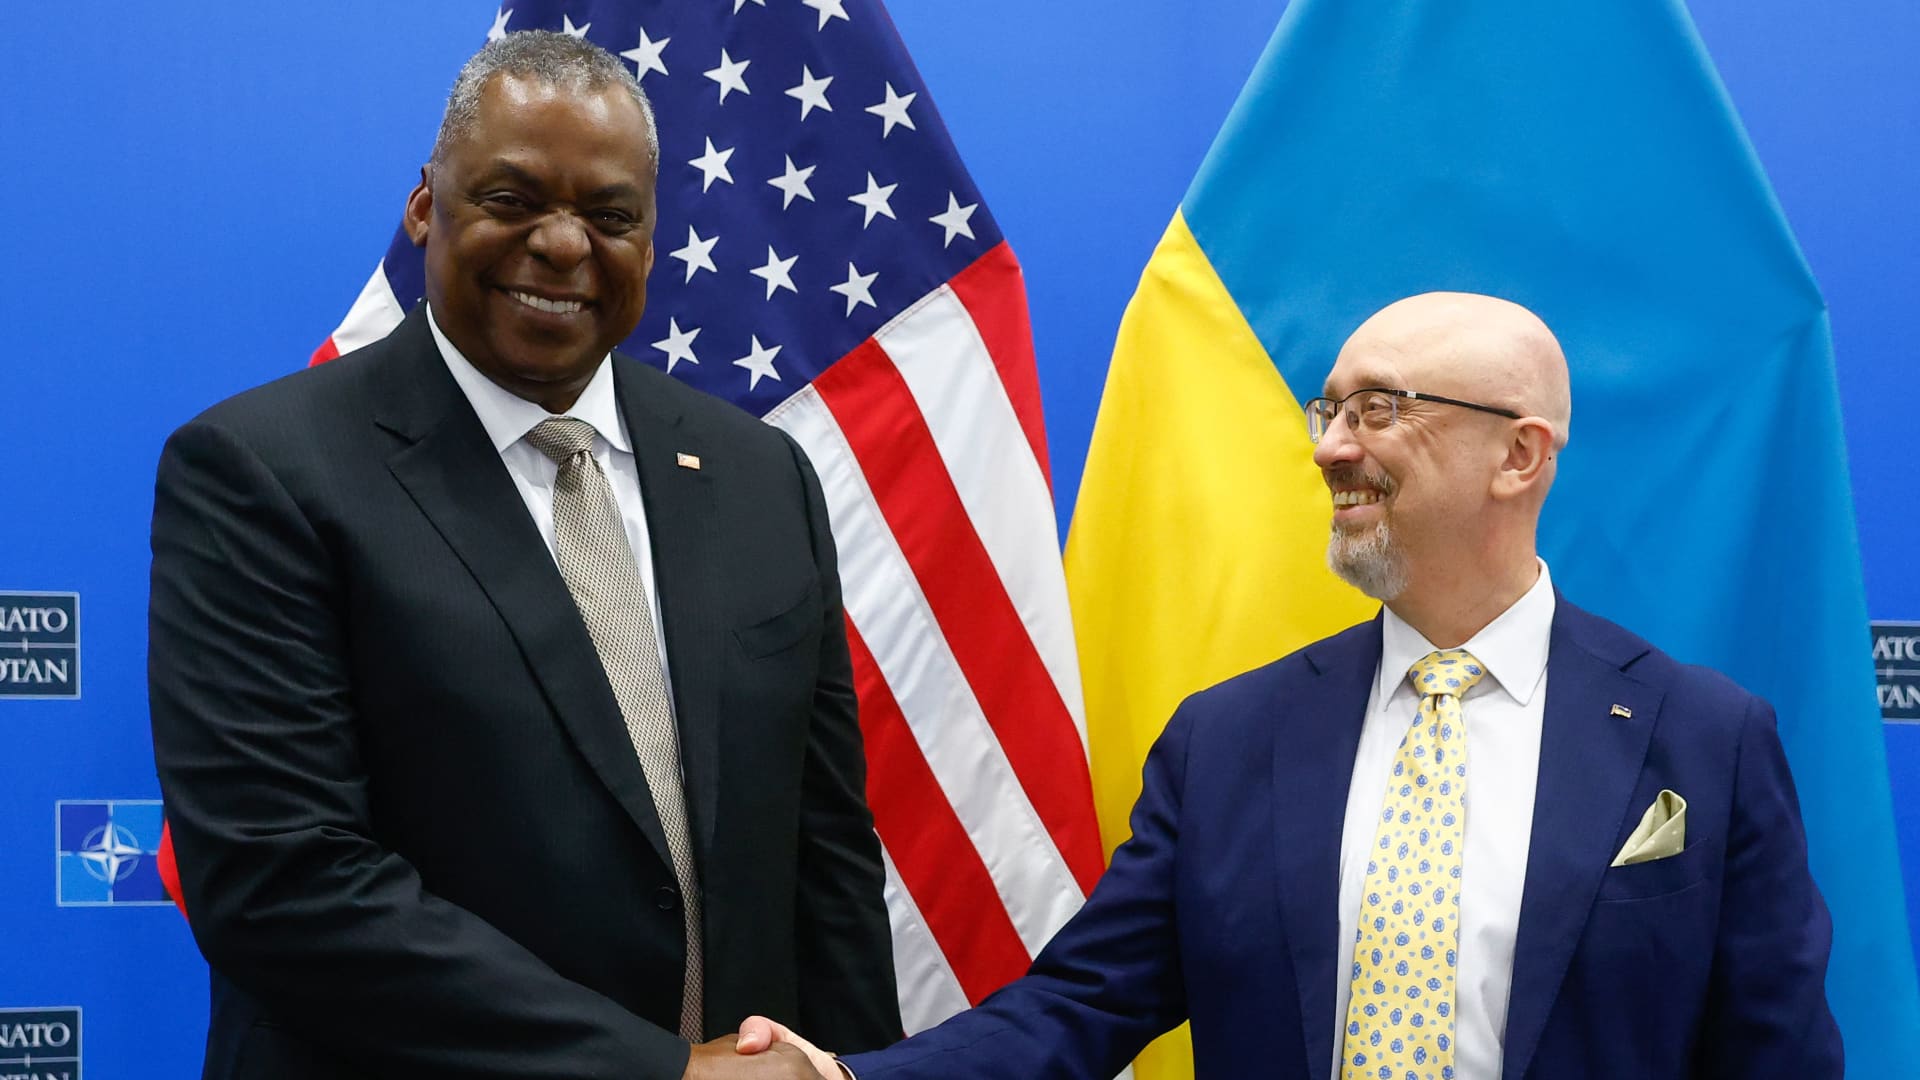 US Defence Secretary Lloyd Austin (L) shakes hand with Ukraine's Defence minister Oleksiy Reznikov (R) ahead of a meeting of the Ukraine Defence contact group as part of a NATO Defence Ministers Council at the Alliance headquarters in Brussels on October 12, 2022.